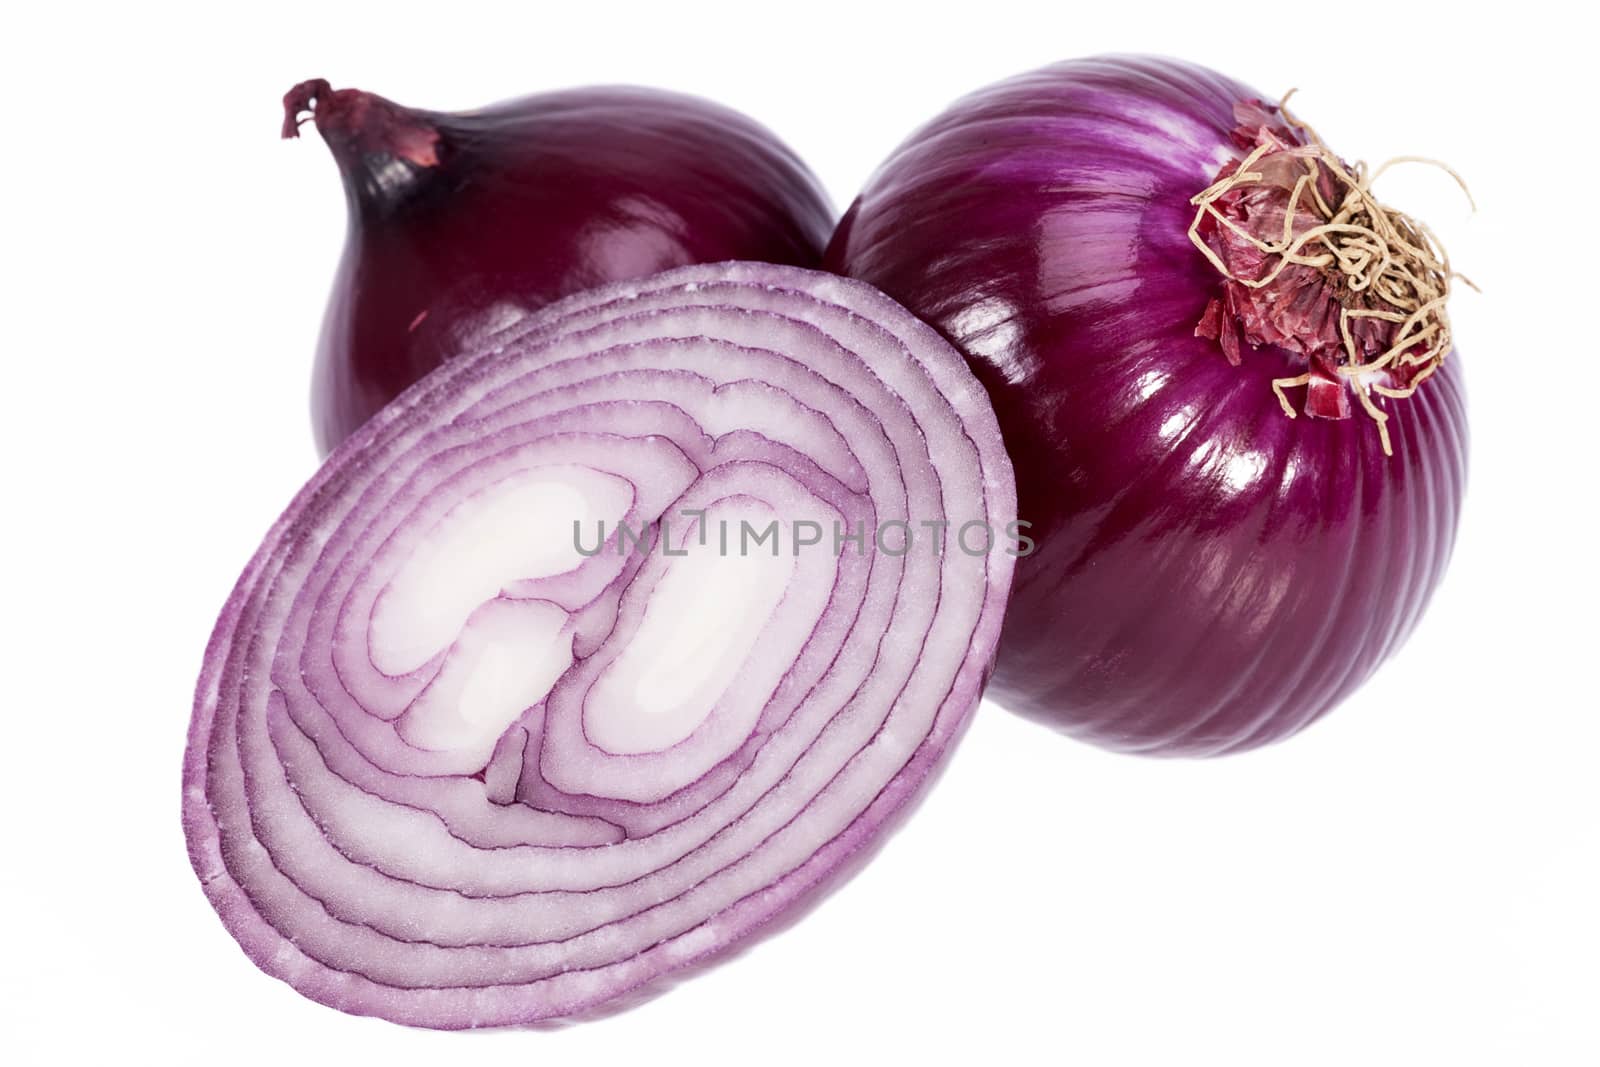 Group of red onions isolated on white background, closeup